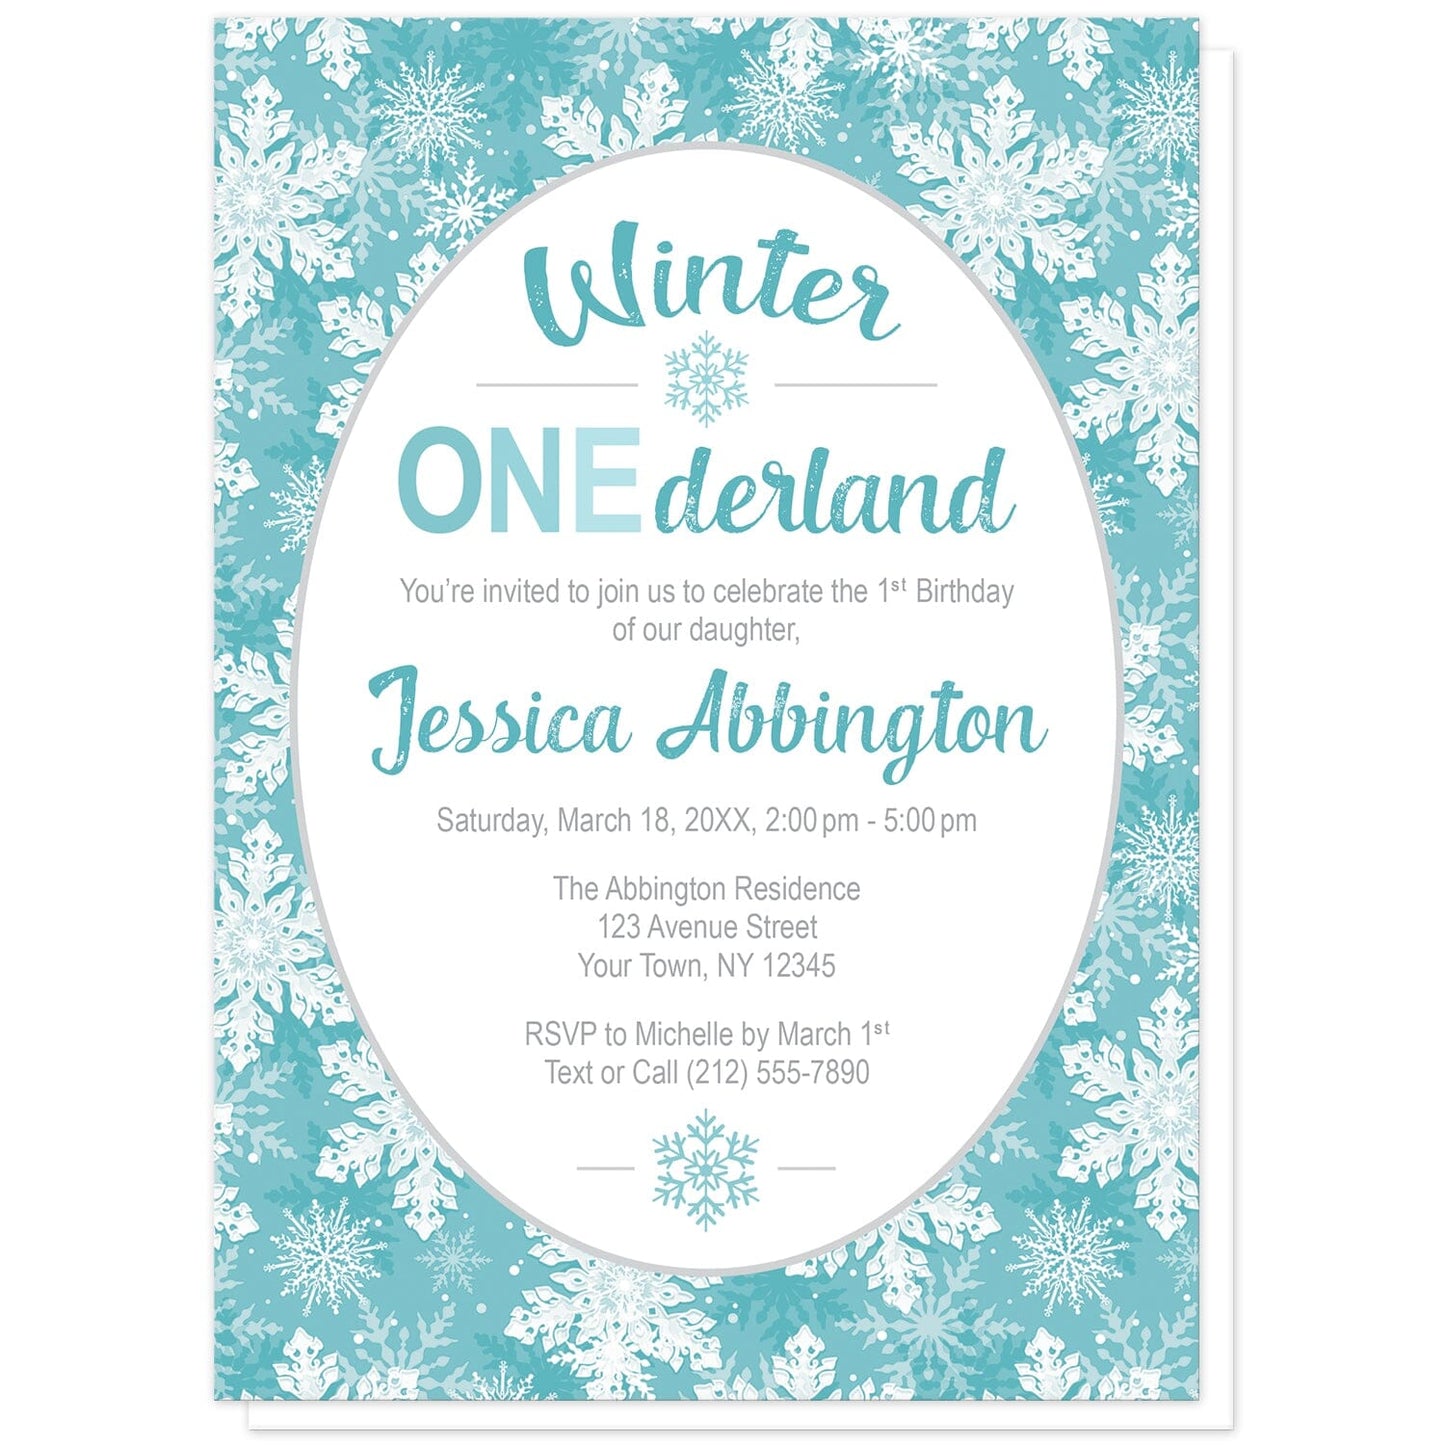 Teal Snowflake 1st Birthday Winter Onederland Invitations at Artistically Invited. Beautifully ornate teal snowflake 1st birthday Winter Onederland invitations designed with your personalized 1st birthday party details custom printed in teal and gray in a white oval frame design over a pretty teal, turquoise, and white snowflake pattern background.